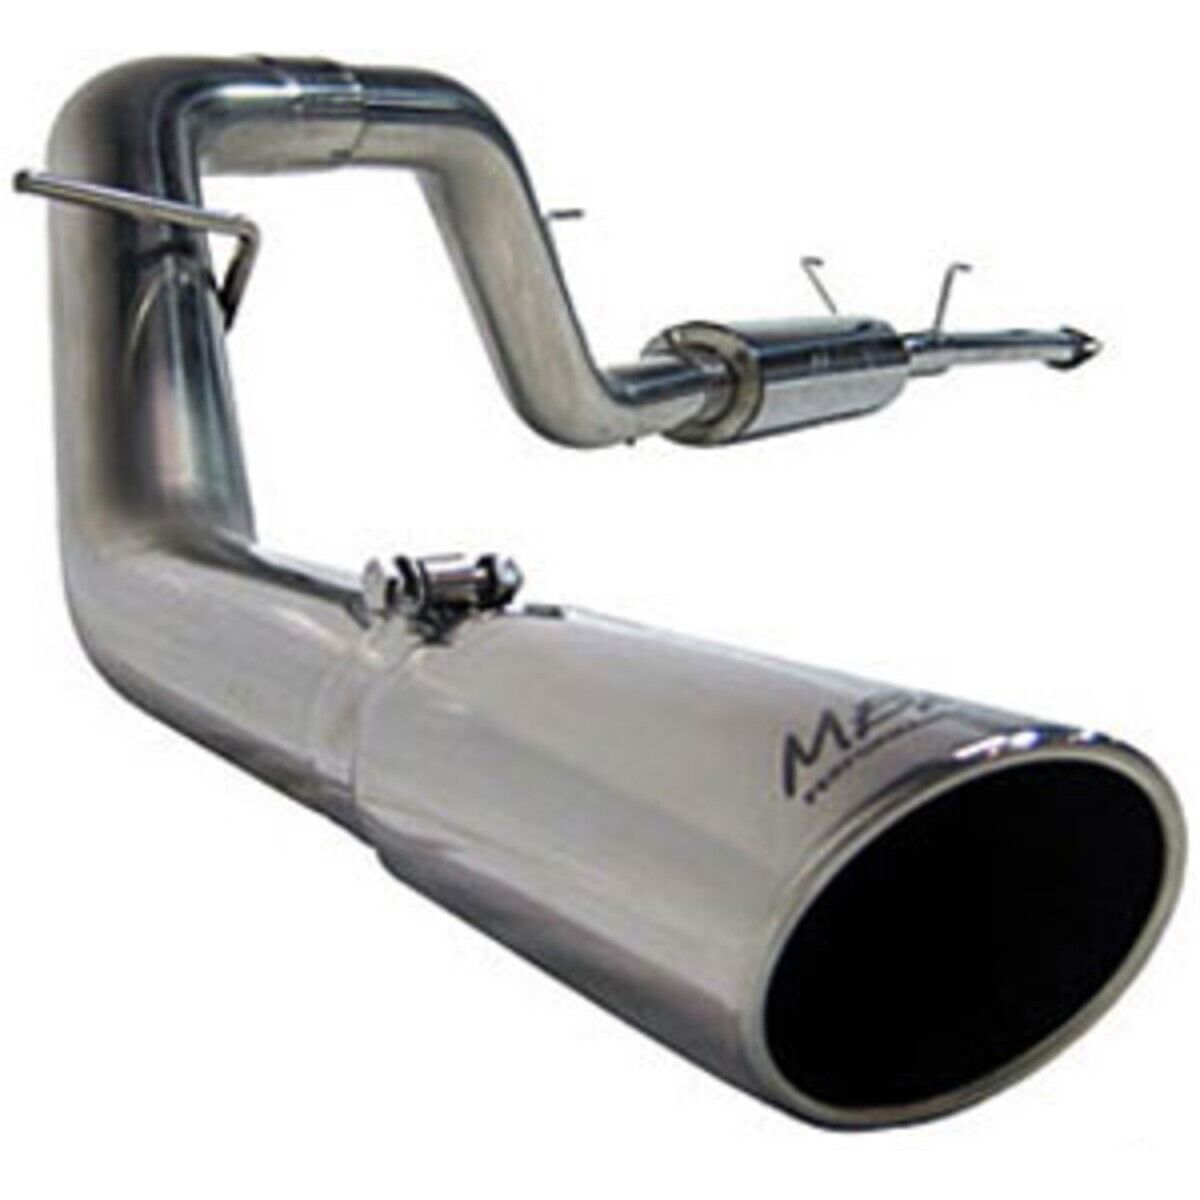 S5024AL MBRP Exhaust System New for Chevy Suburban Yukon Chevrolet 1500 GMC XL